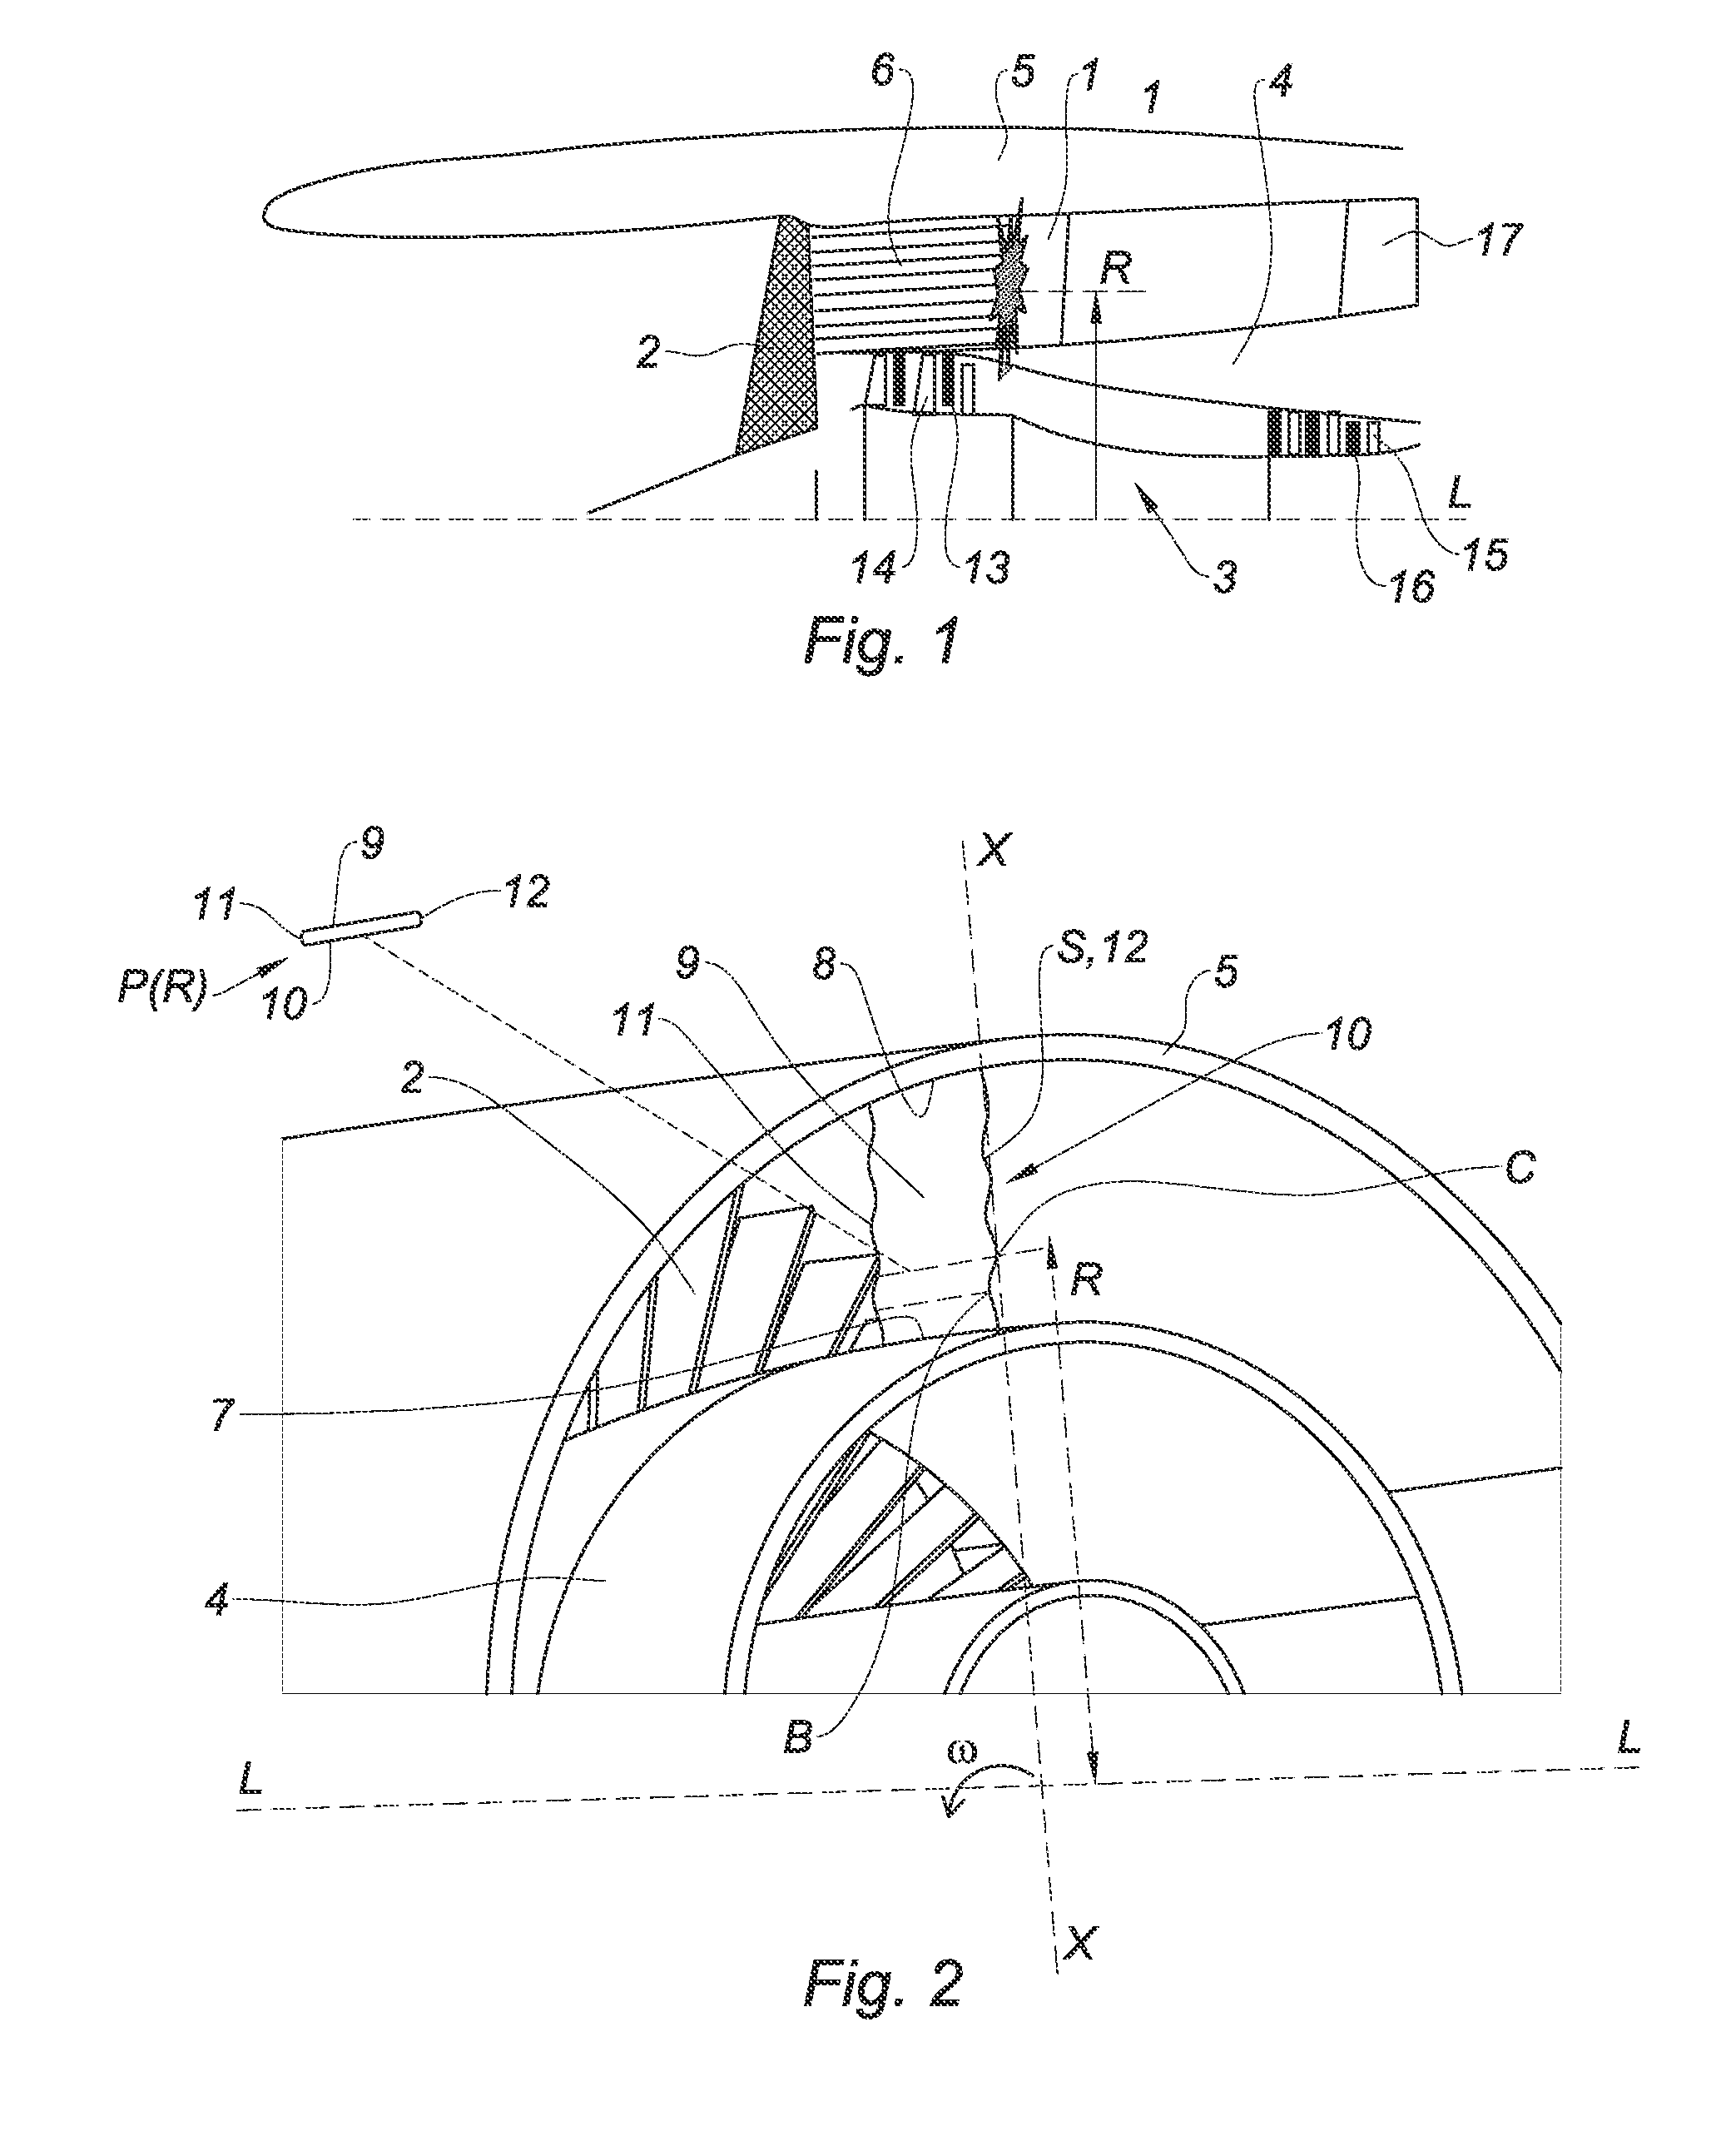 Undulating stator for reducing the noise produced by interaction with a rotor